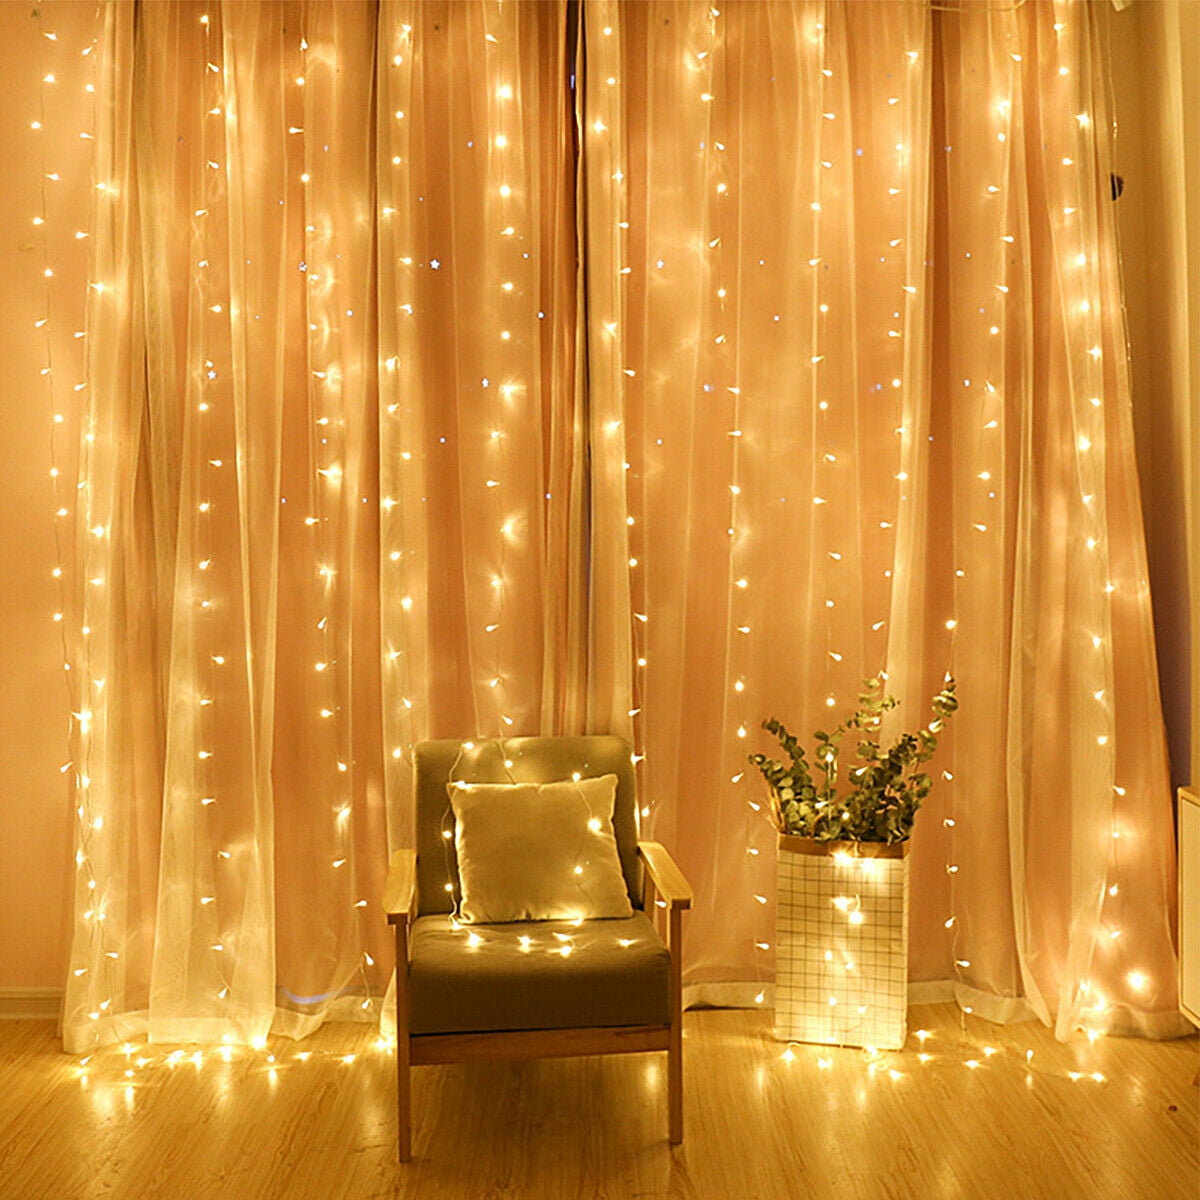 300 LED Curtain Fairy Hanging String Lights Christmas Wedding Party Home Decor 